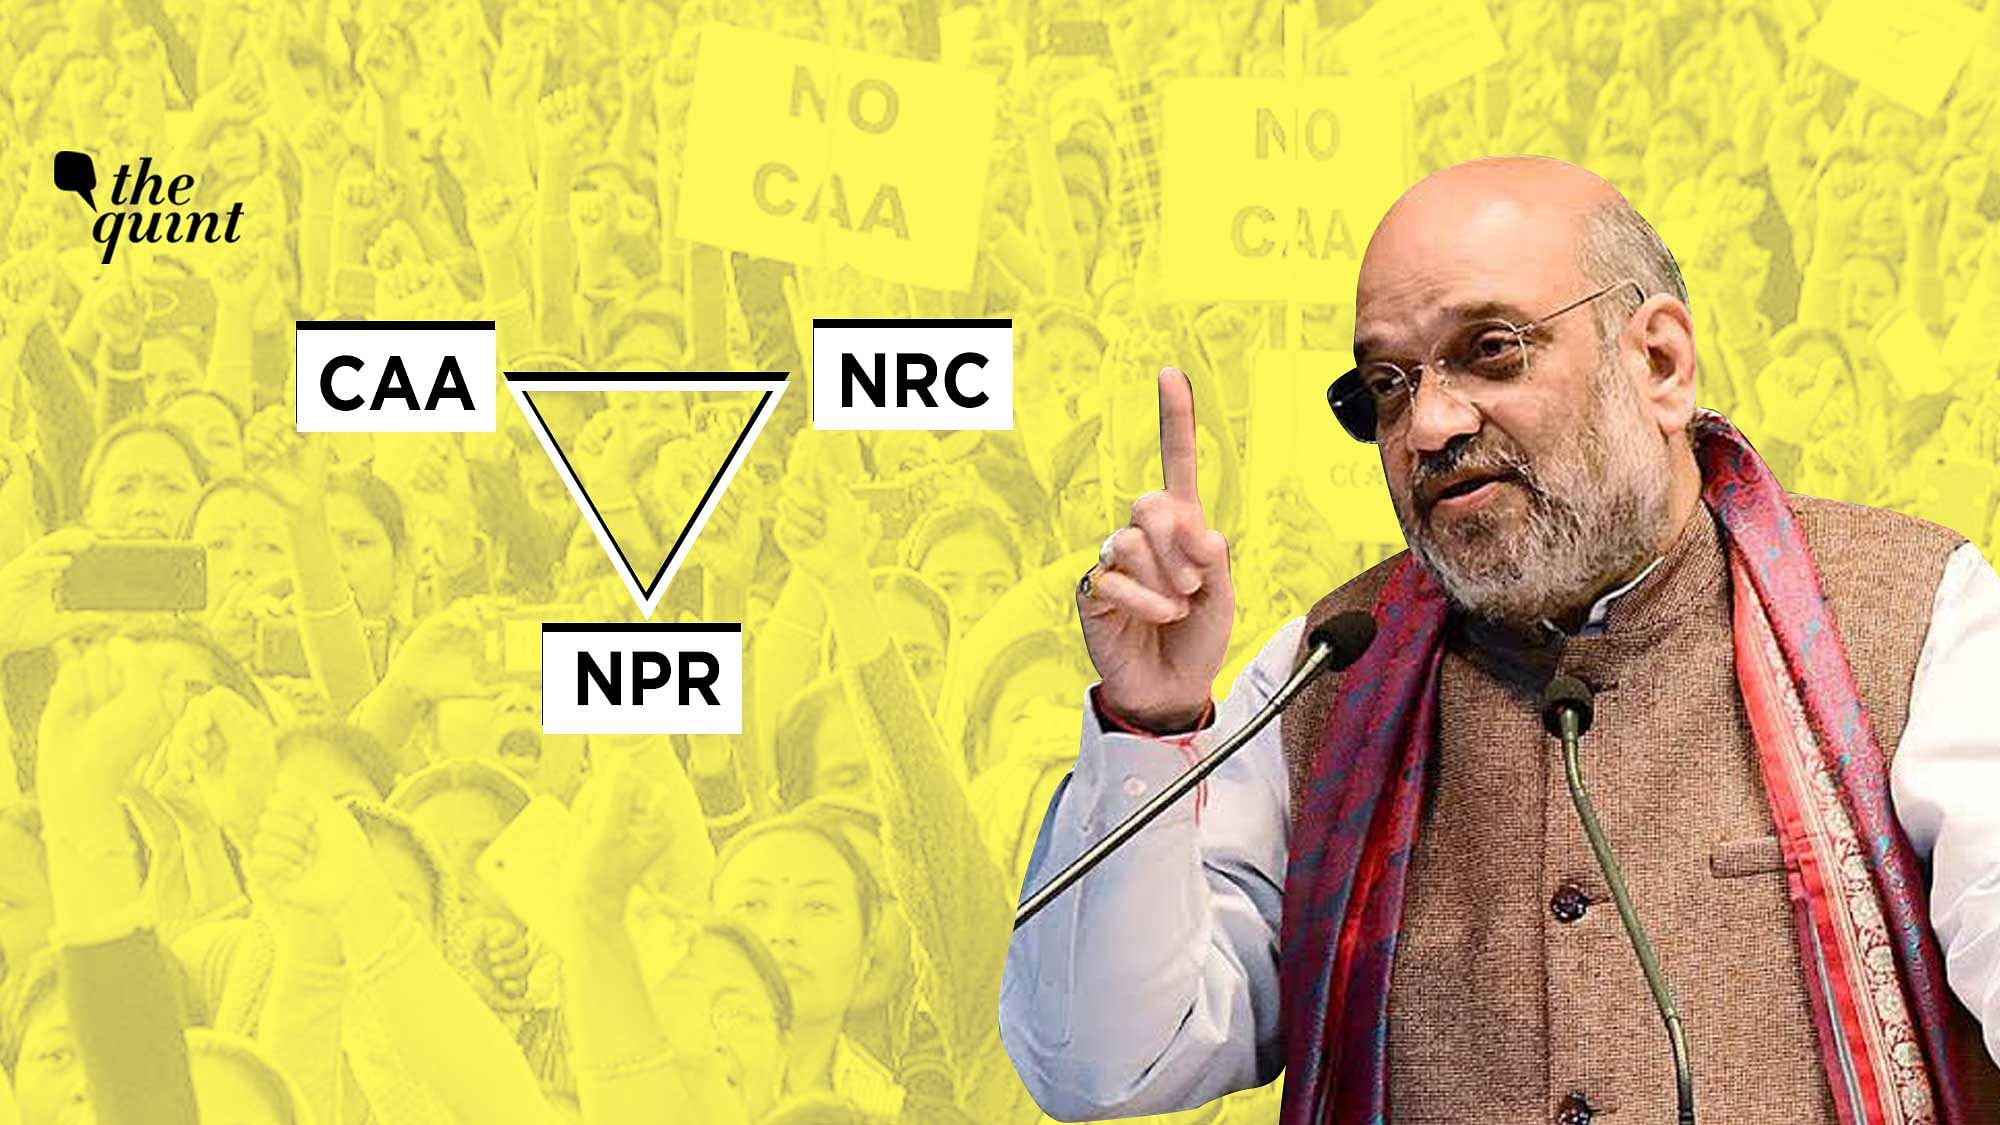 While Union Home Minister Amit Shah has asserted that there is no link between the NPR and NRC, Supreme Court Advocate, Gautam Bhatia, and independent researcher, Srinivas Kodali explain NPR’s link with NPR, CAA and its history.&nbsp;